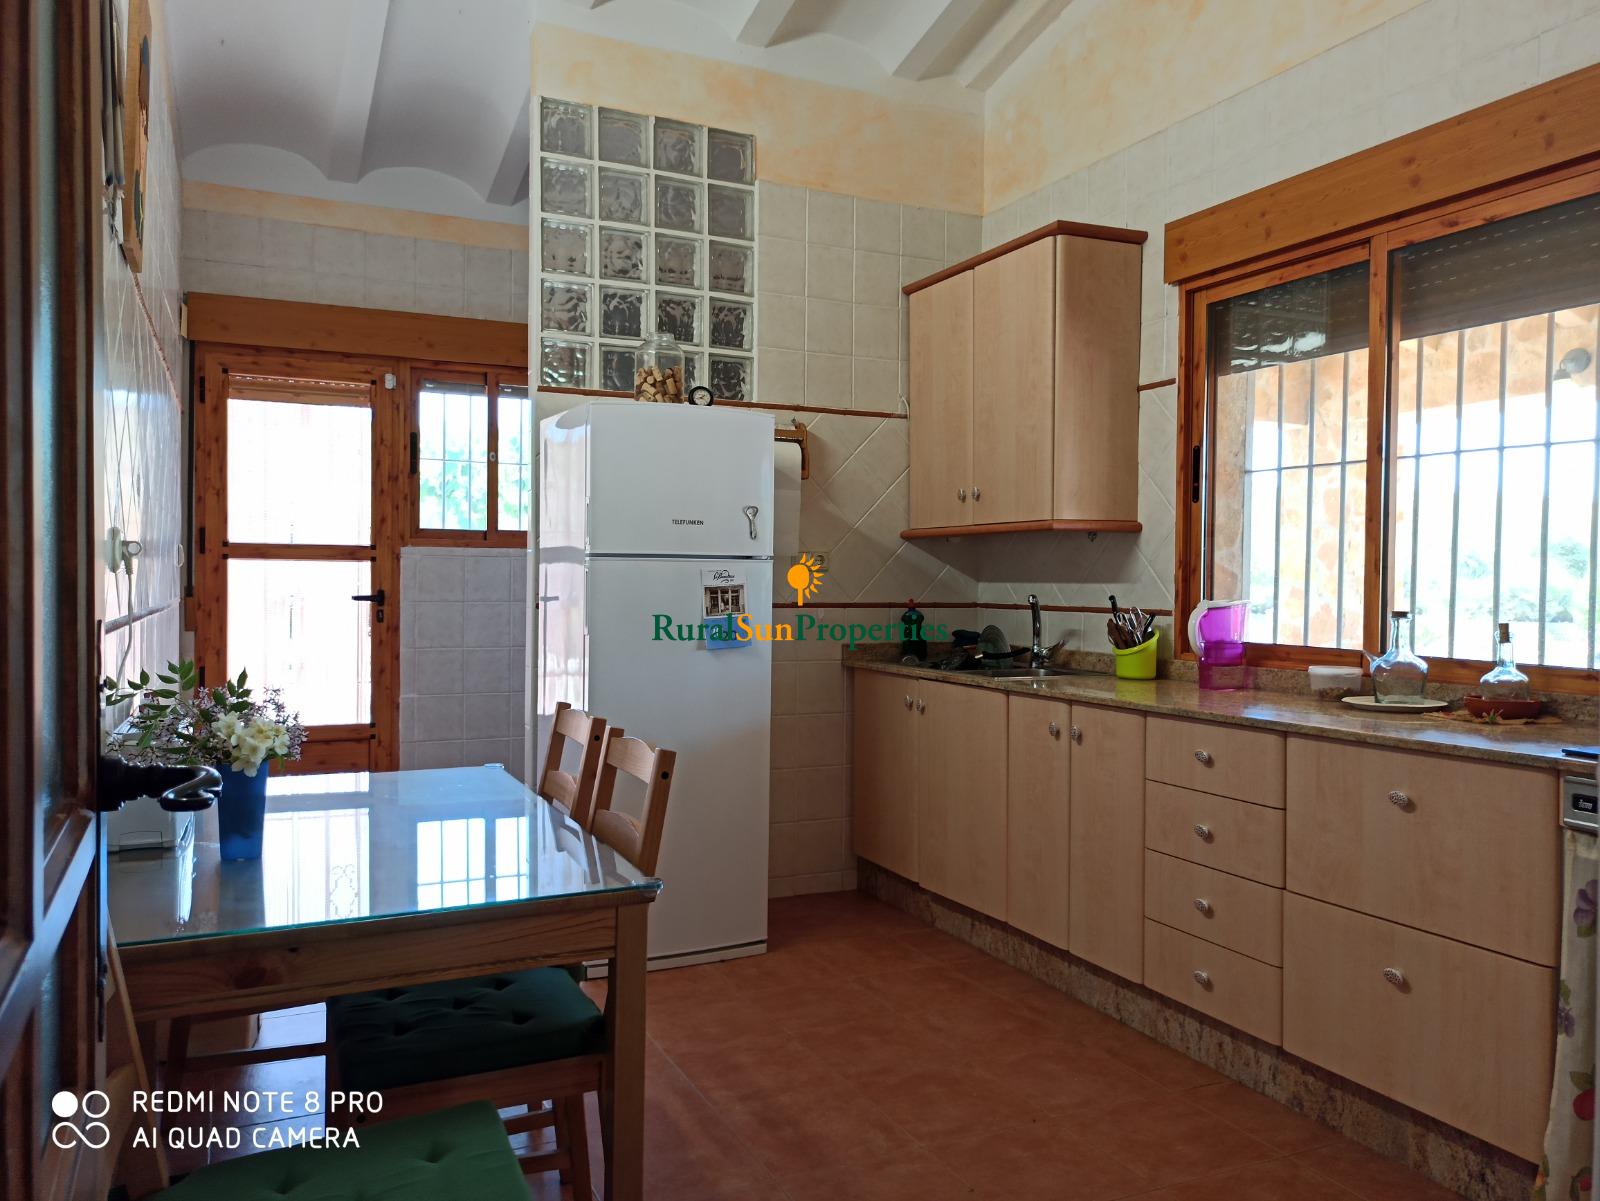 COUNTRY HOUSE IN BULLAS 3 kilometres from the town centre.